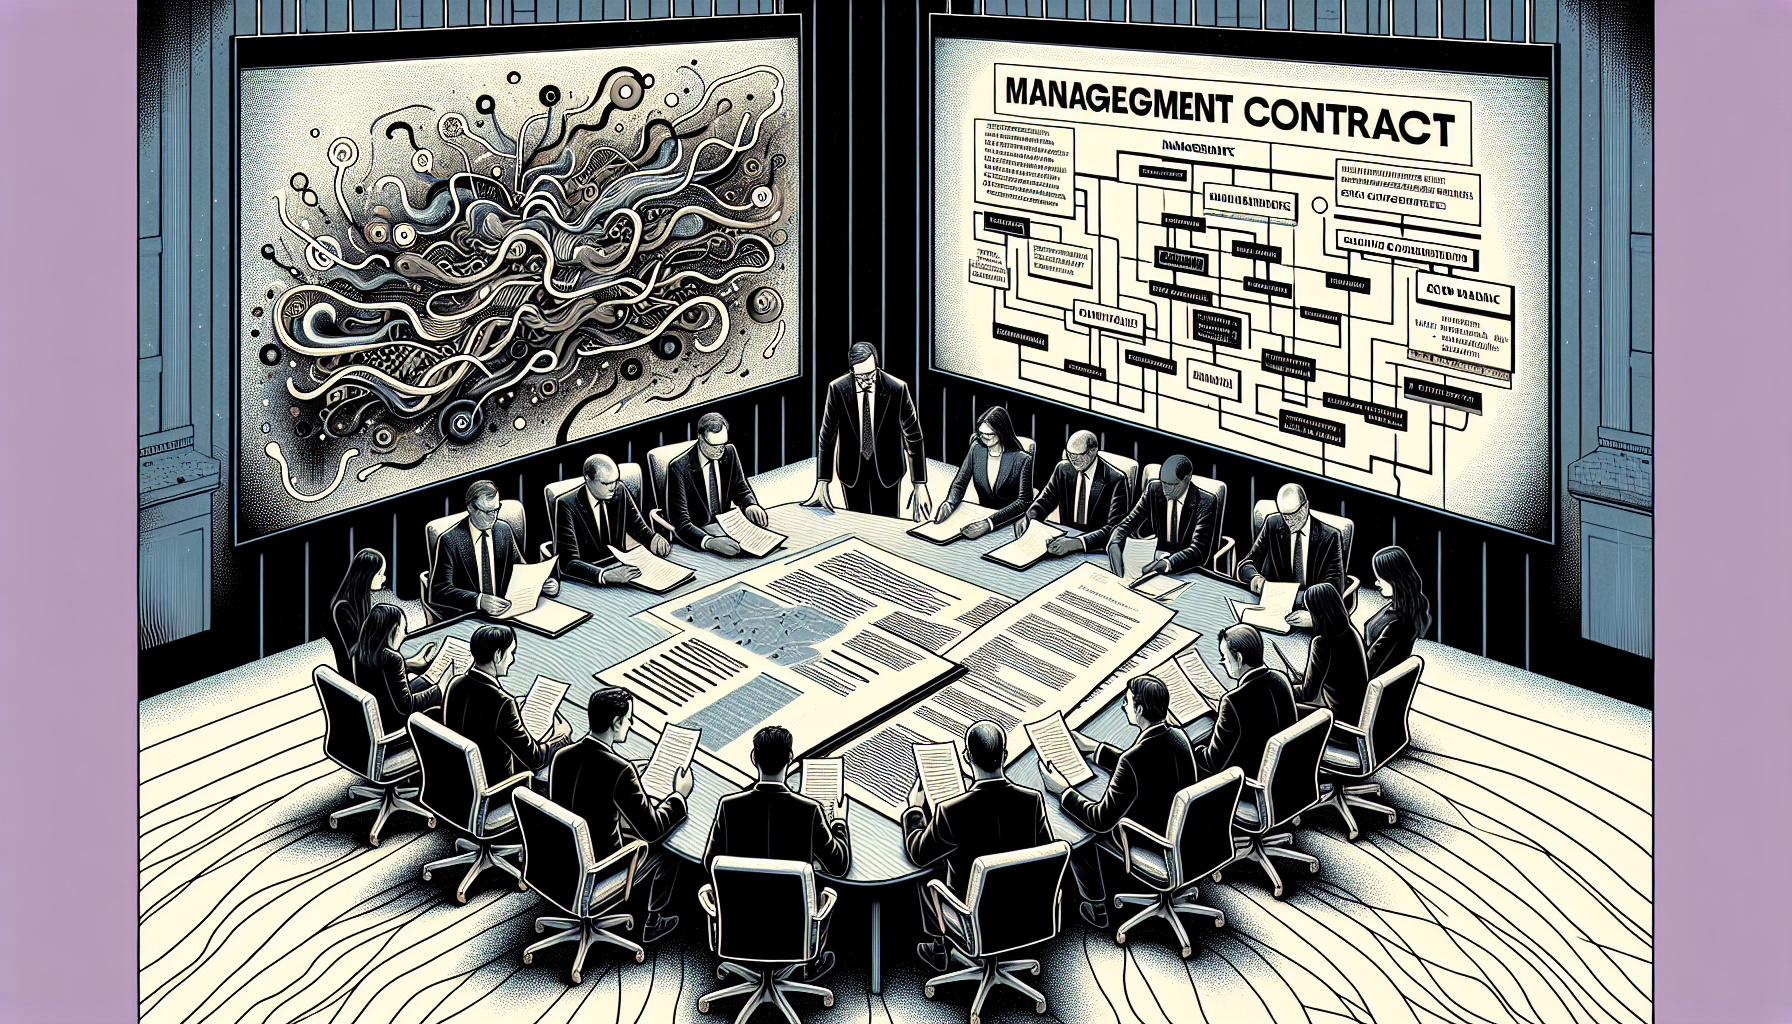 Illustration of management contract review